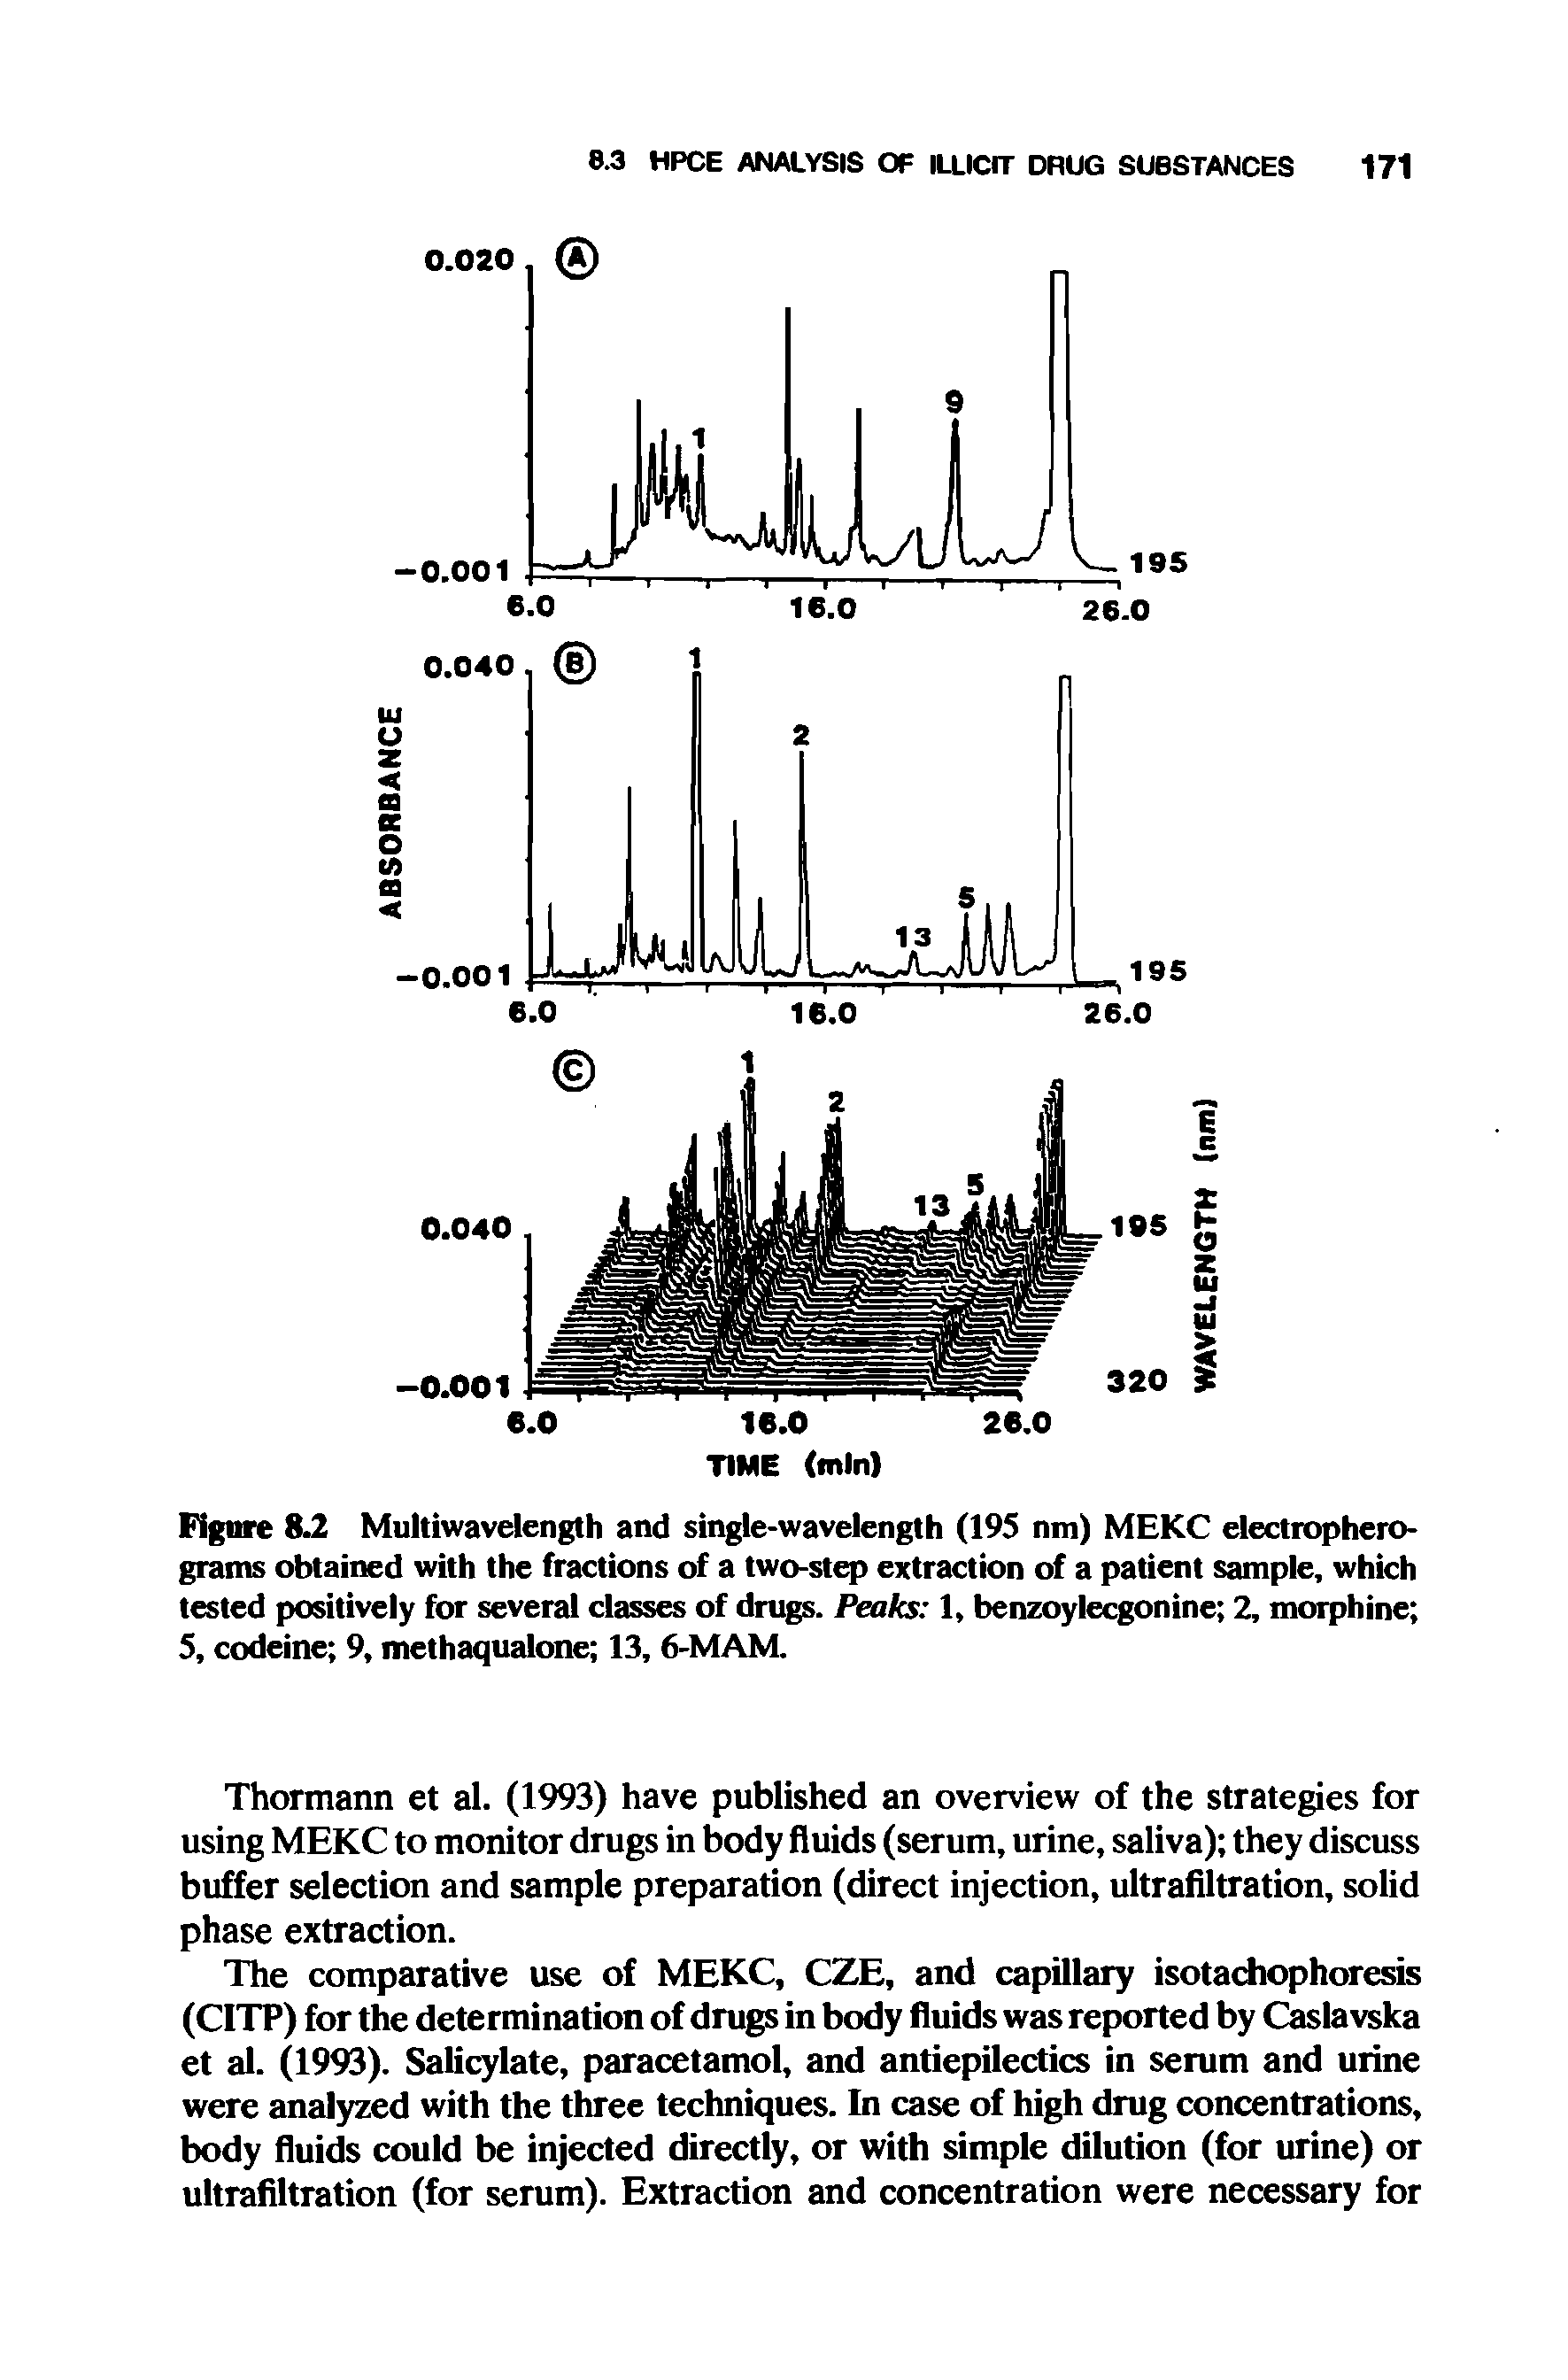 Figure 8.2 Multiwavelength and single-wavelength (195 nm) MEKC electrophero-grams obtained with the fractions of a two-step extraction of a patient sample, which tested positively for several classes of drugs. Peaks 1, benzoylecgonine 2, morphine 5, codeine 9, methaqualone 13, 6-MAM.